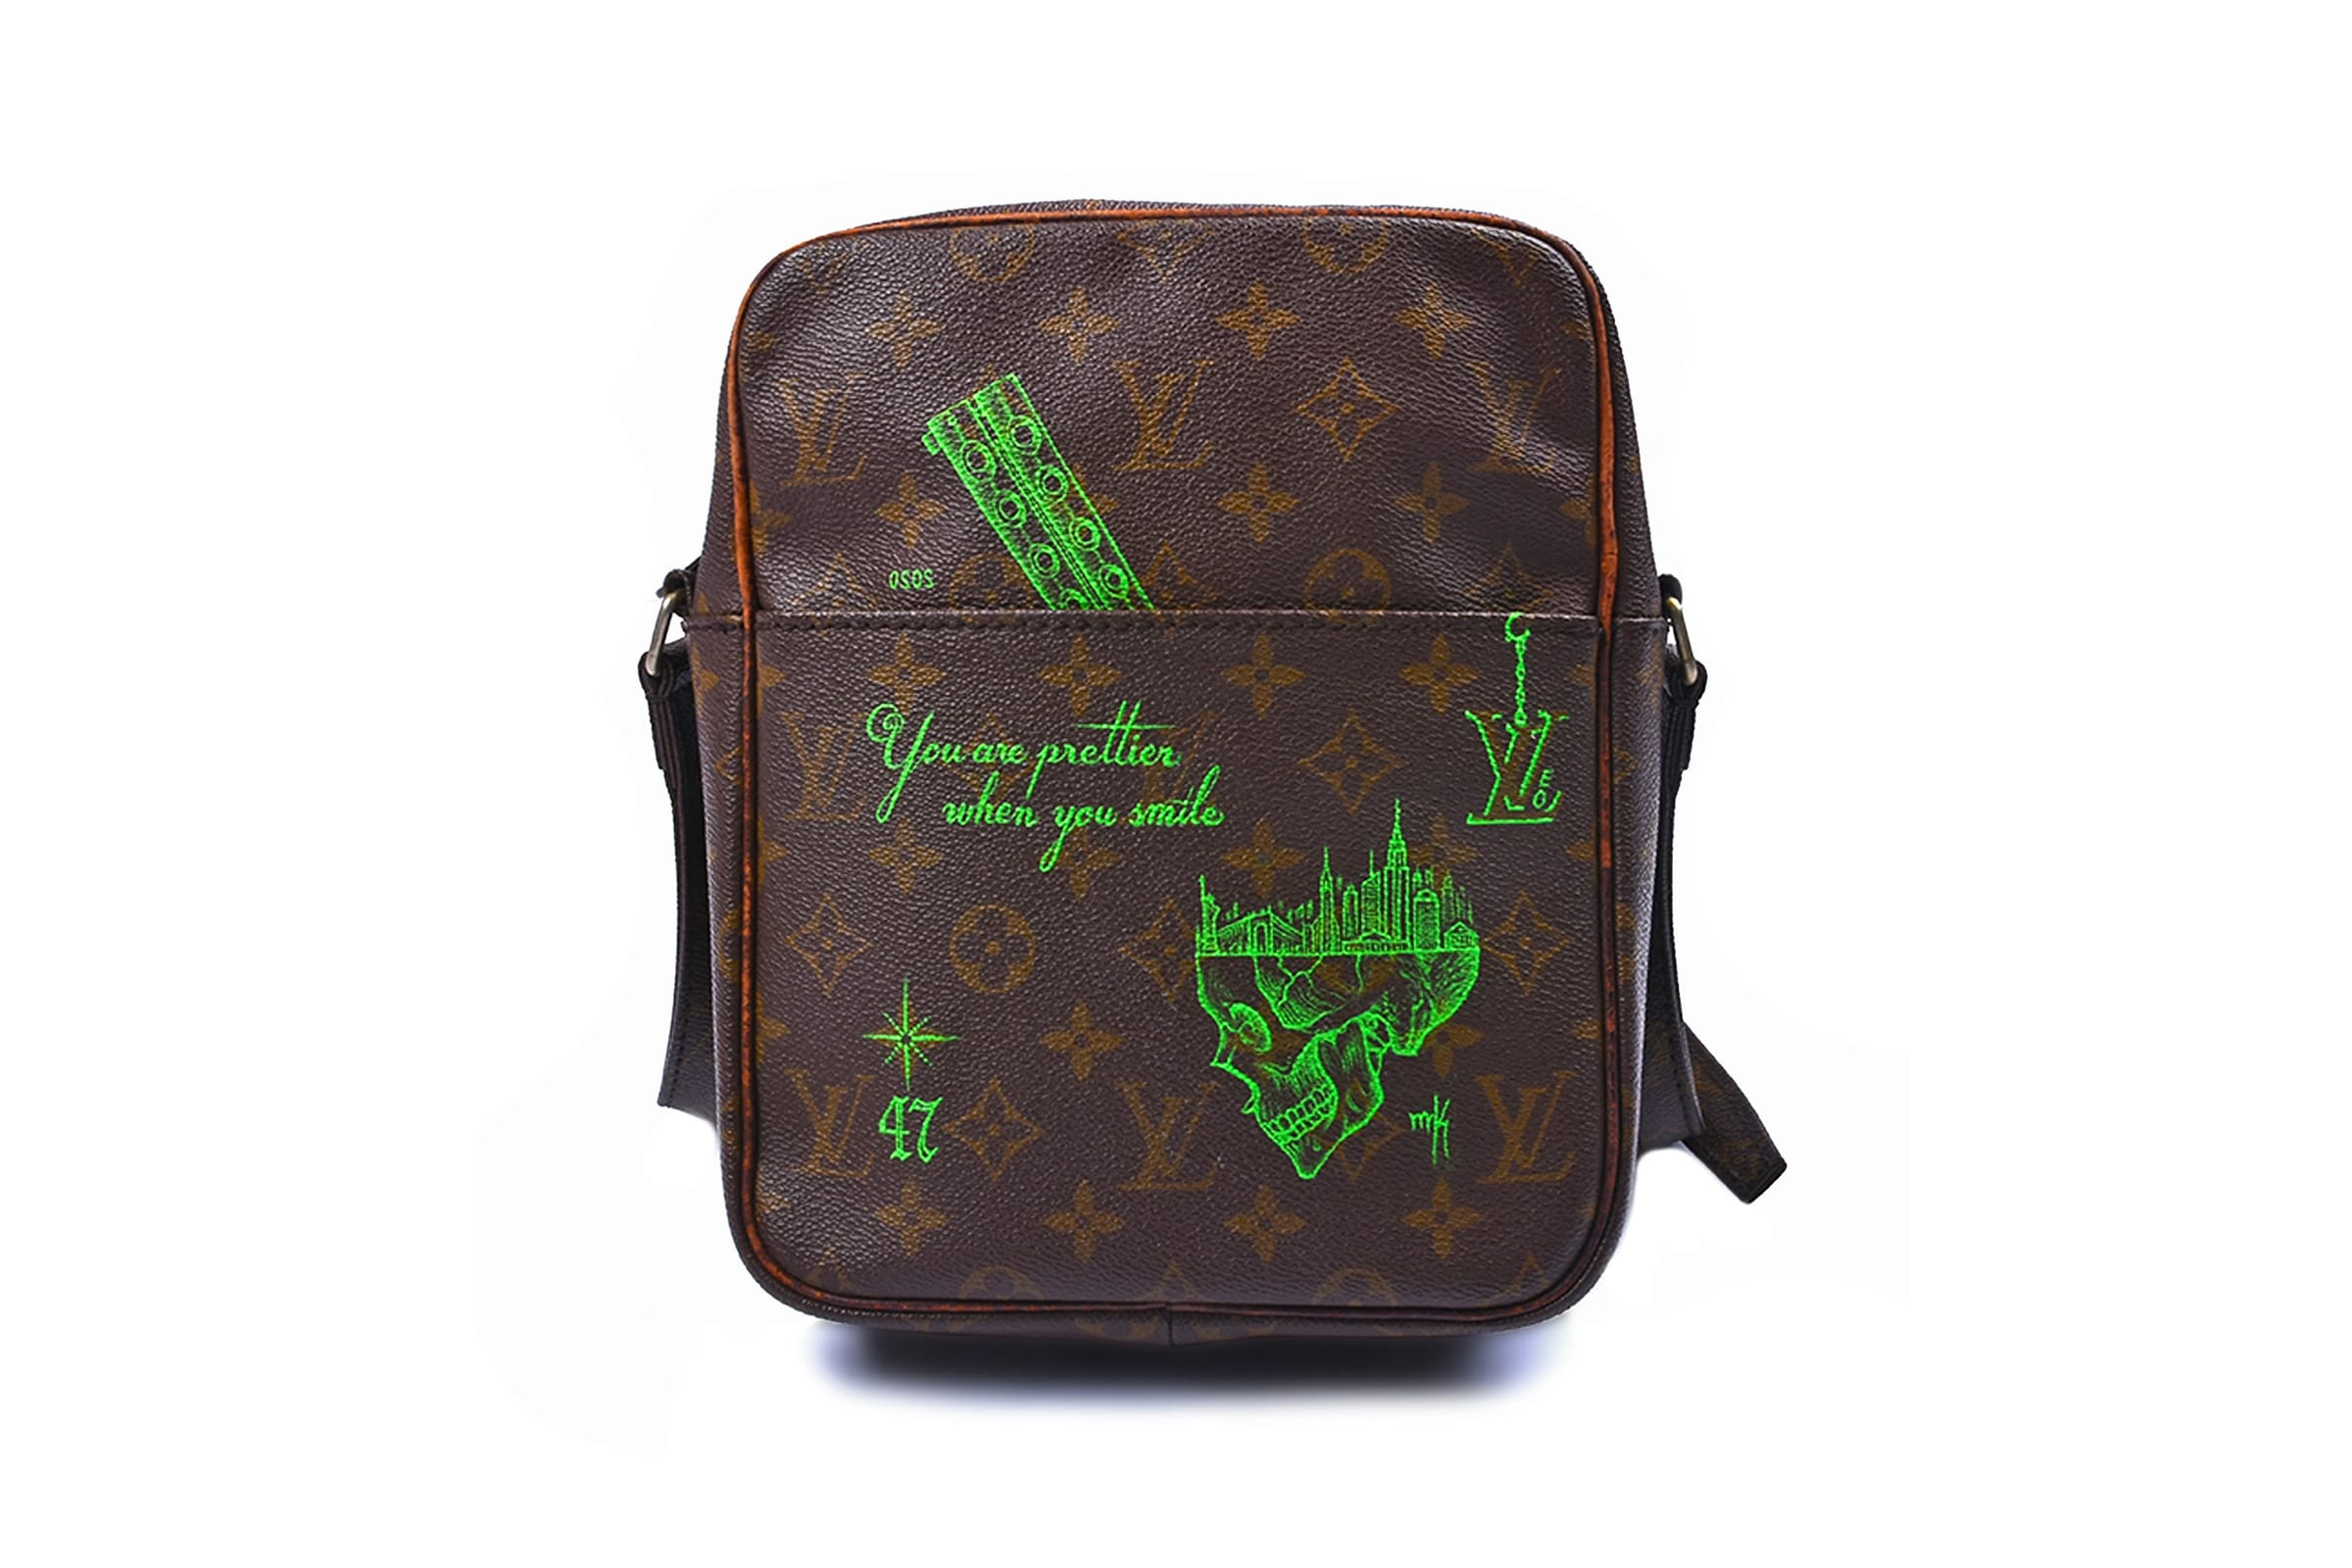 Custom Painting on LV or Any Branded Bag Professional Fee  Etsy